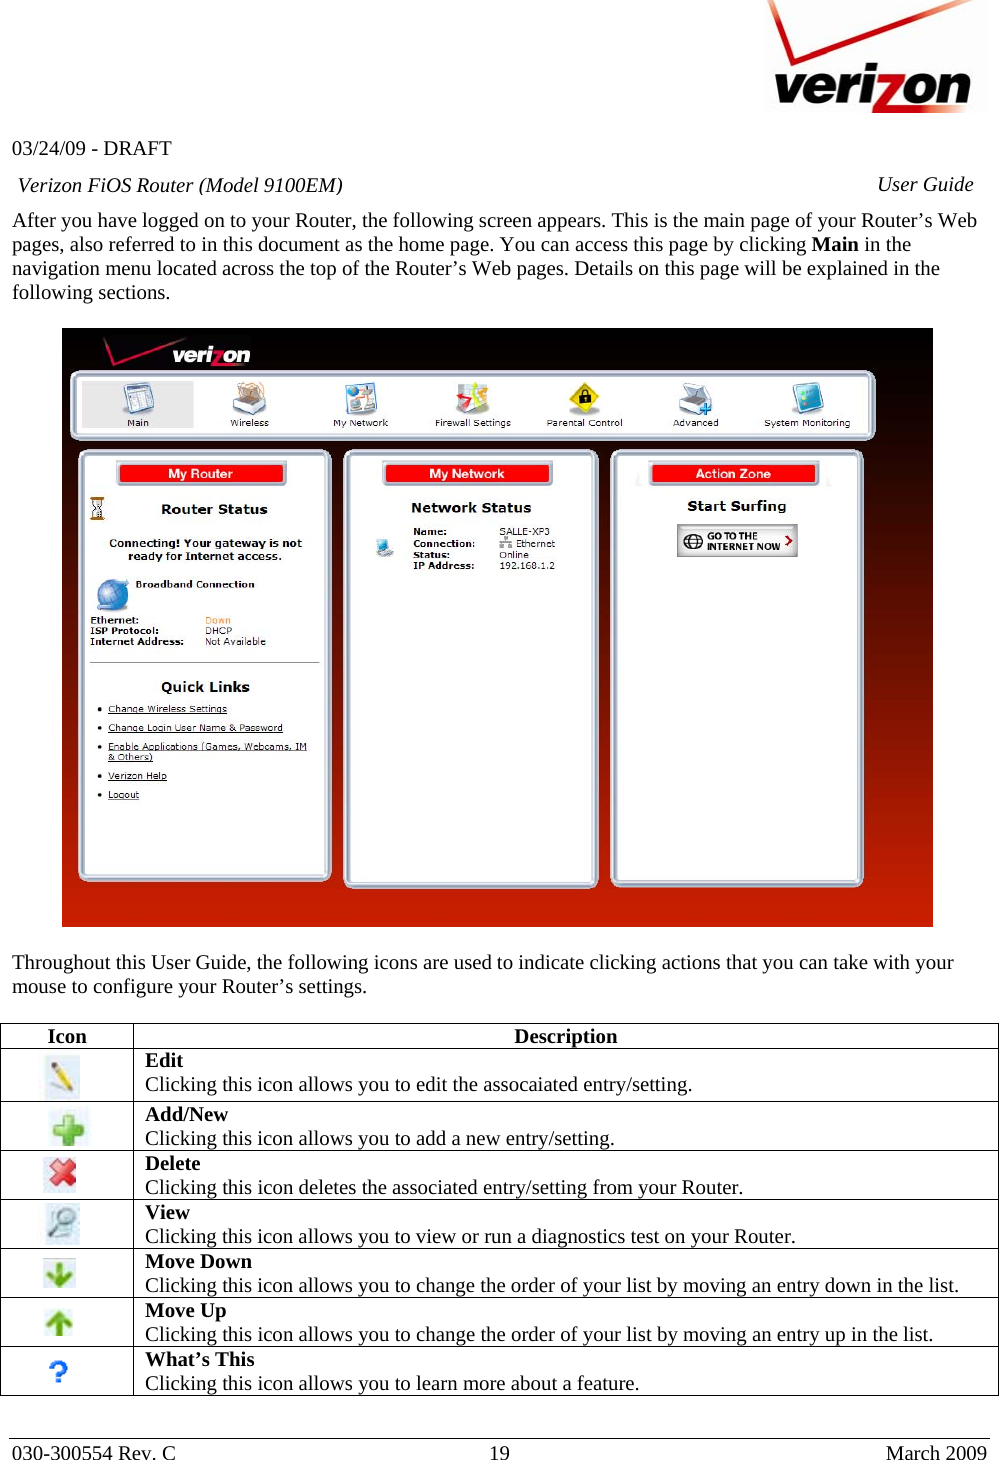   03/24/09 - DRAFT   030-300554 Rev. C  19      March 2009  Verizon FiOS Router (Model 9100EM) User GuideAfter you have logged on to your Router, the following screen appears. This is the main page of your Router’s Web pages, also referred to in this document as the home page. You can access this page by clicking Main in the navigation menu located across the top of the Router’s Web pages. Details on this page will be explained in the following sections.    Throughout this User Guide, the following icons are used to indicate clicking actions that you can take with your mouse to configure your Router’s settings.  Icon Description        Edit Clicking this icon allows you to edit the assocaiated entry/setting.     Add/New Clicking this icon allows you to add a new entry/setting.         Delete Clicking this icon deletes the associated entry/setting from your Router.        View Clicking this icon allows you to view or run a diagnostics test on your Router.         Move Down  Clicking this icon allows you to change the order of your list by moving an entry down in the list.         Move Up Clicking this icon allows you to change the order of your list by moving an entry up in the list.          What’s This Clicking this icon allows you to learn more about a feature.  